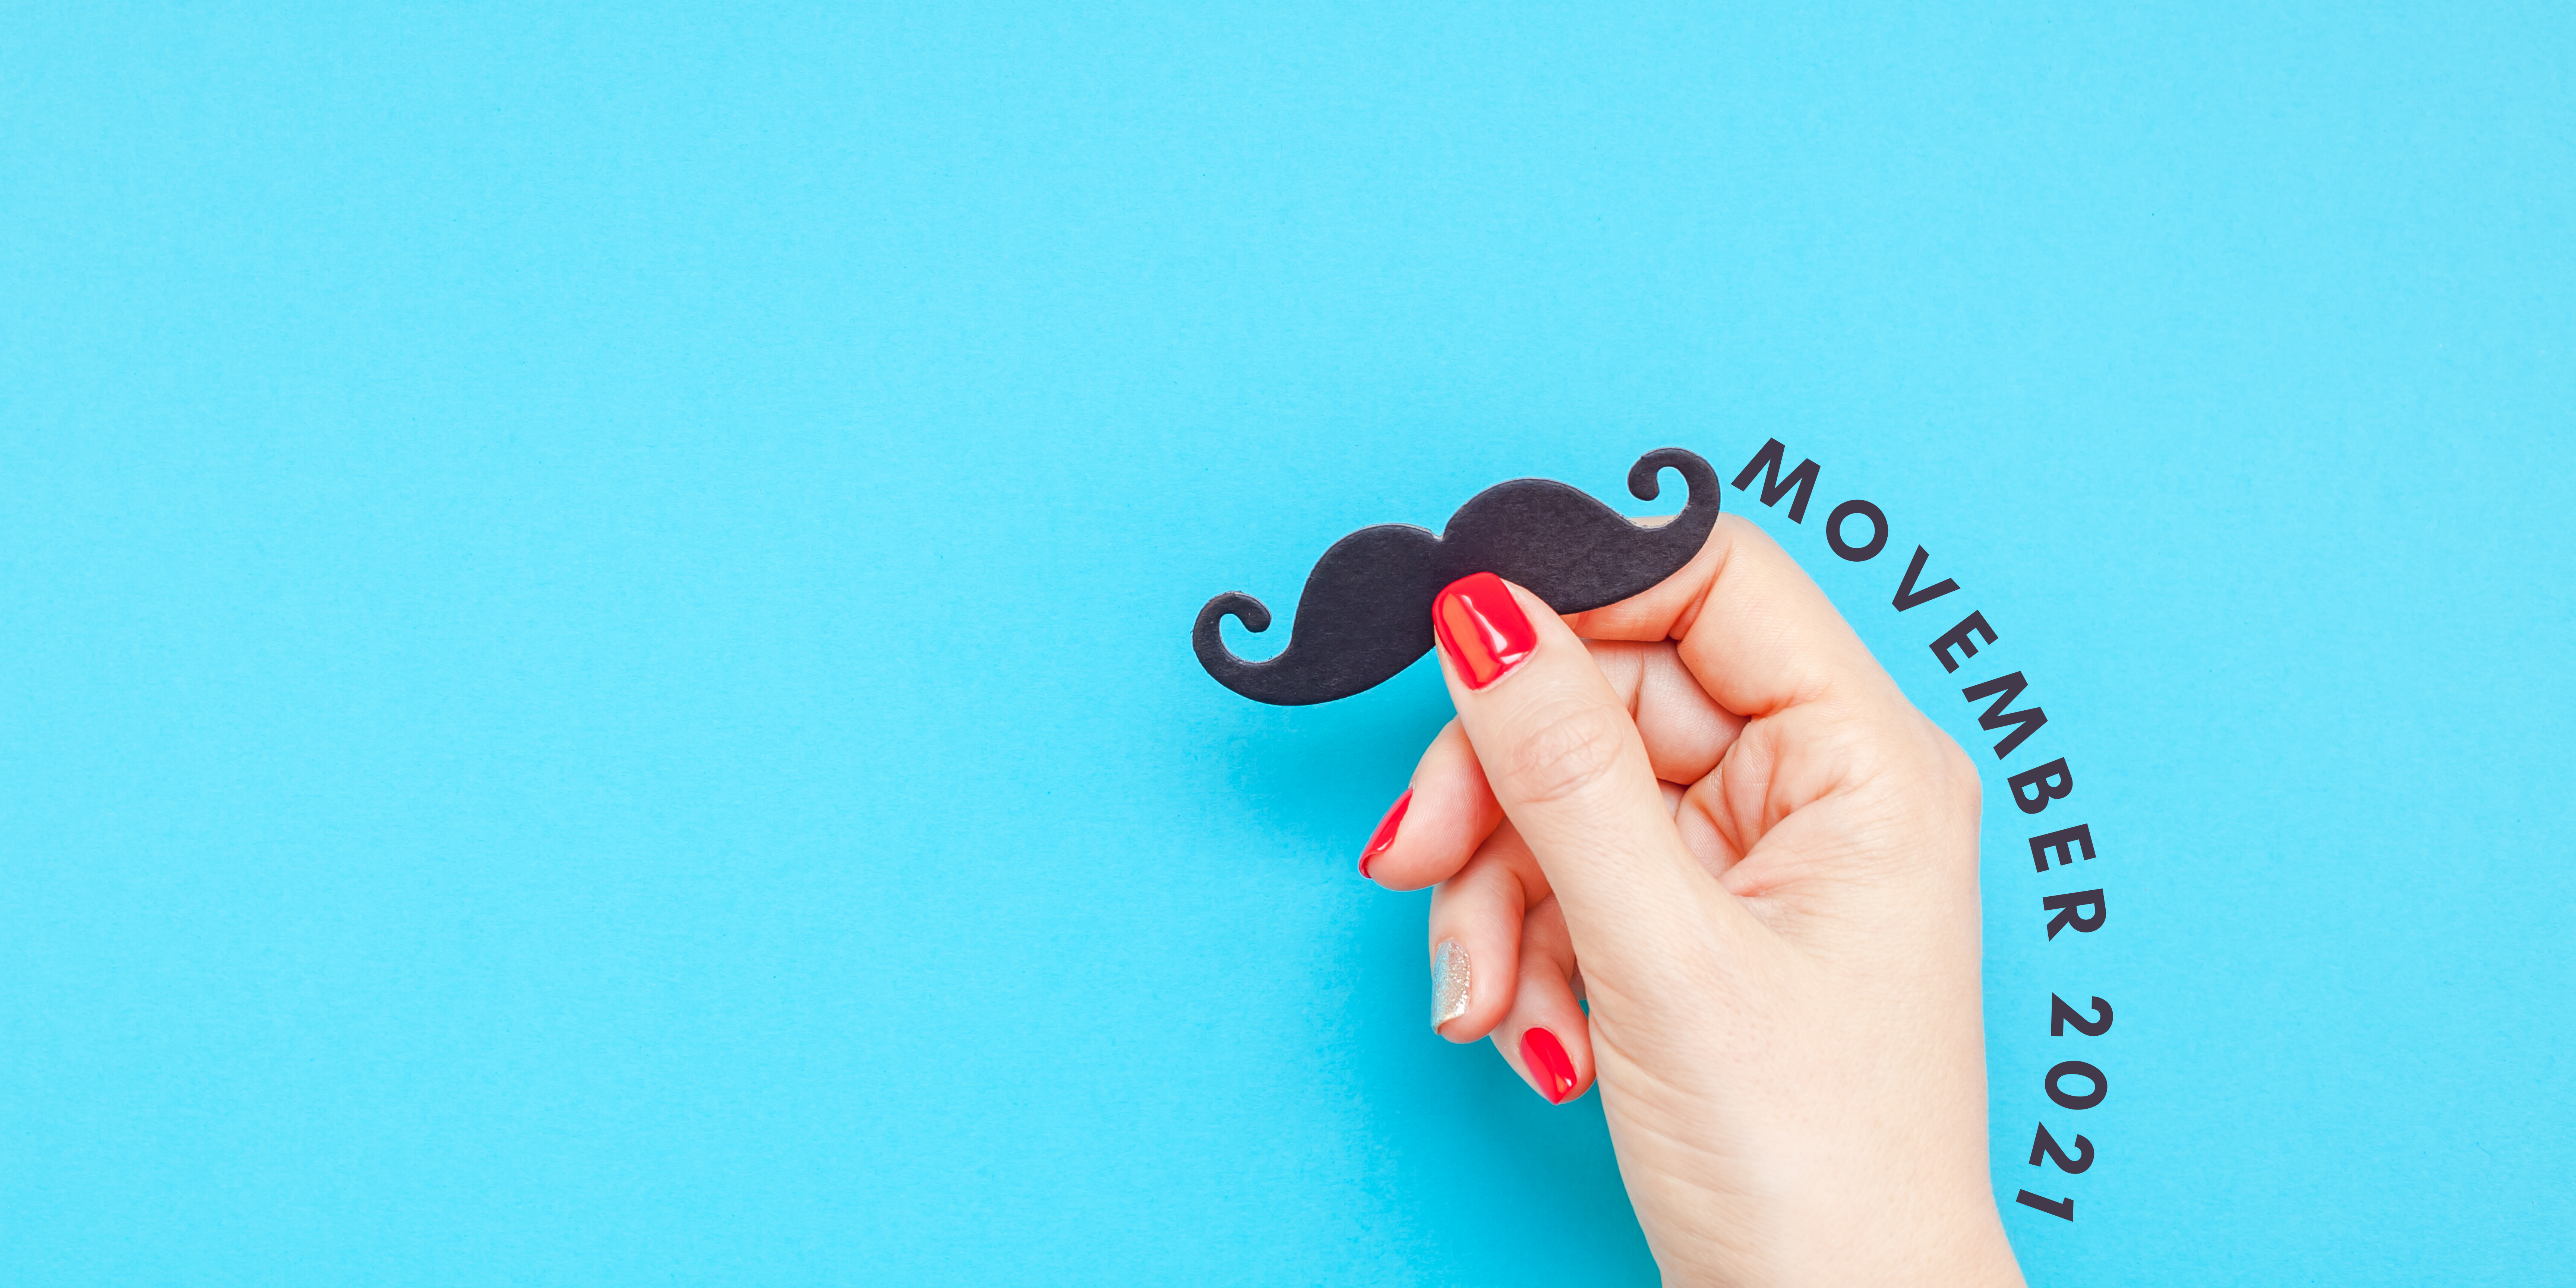 A woman holding a paper cutout of a black curly moustache. Her nails are painted red and silver, and the words "Movember 2021" are written in a curve arouund her hand.